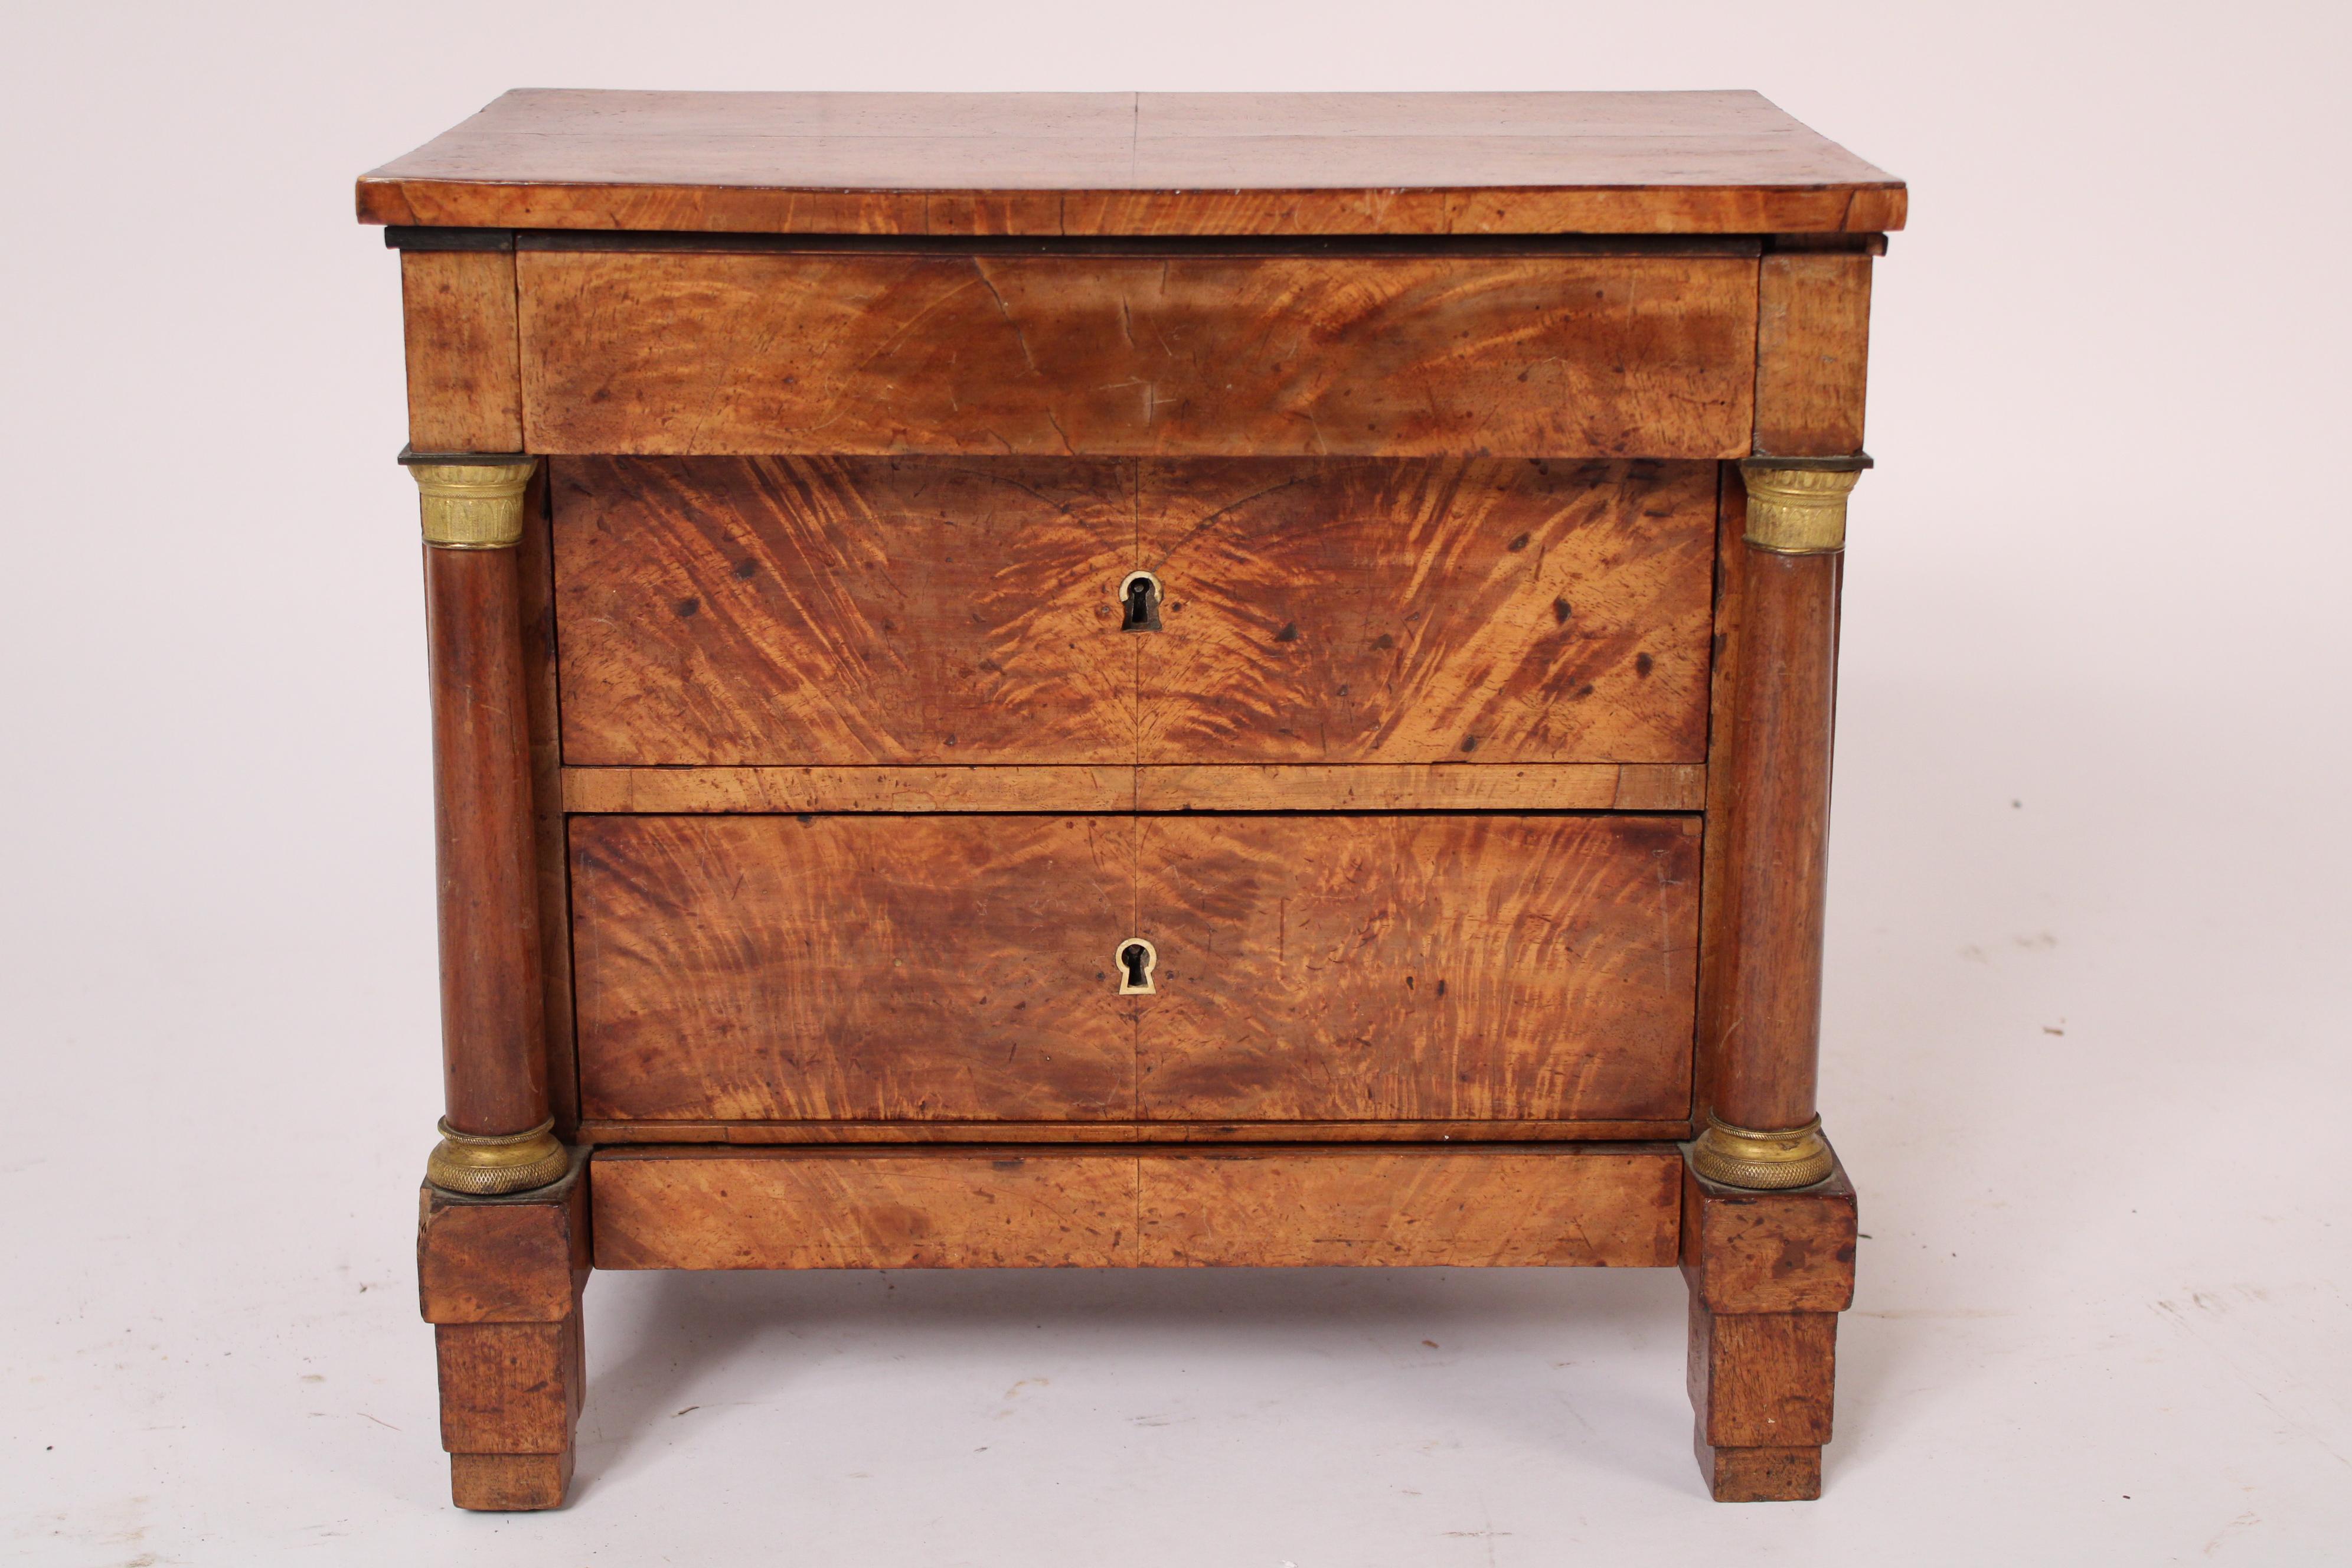 Antique Empire mahogany and birch salesman sample chest of drawers, circa 1820. With a rectangular birch top, a protruding frieze drawer, two larger lower drawers with flame mahogany and an apron drawer, flanked by columns with gilt bronze capitals